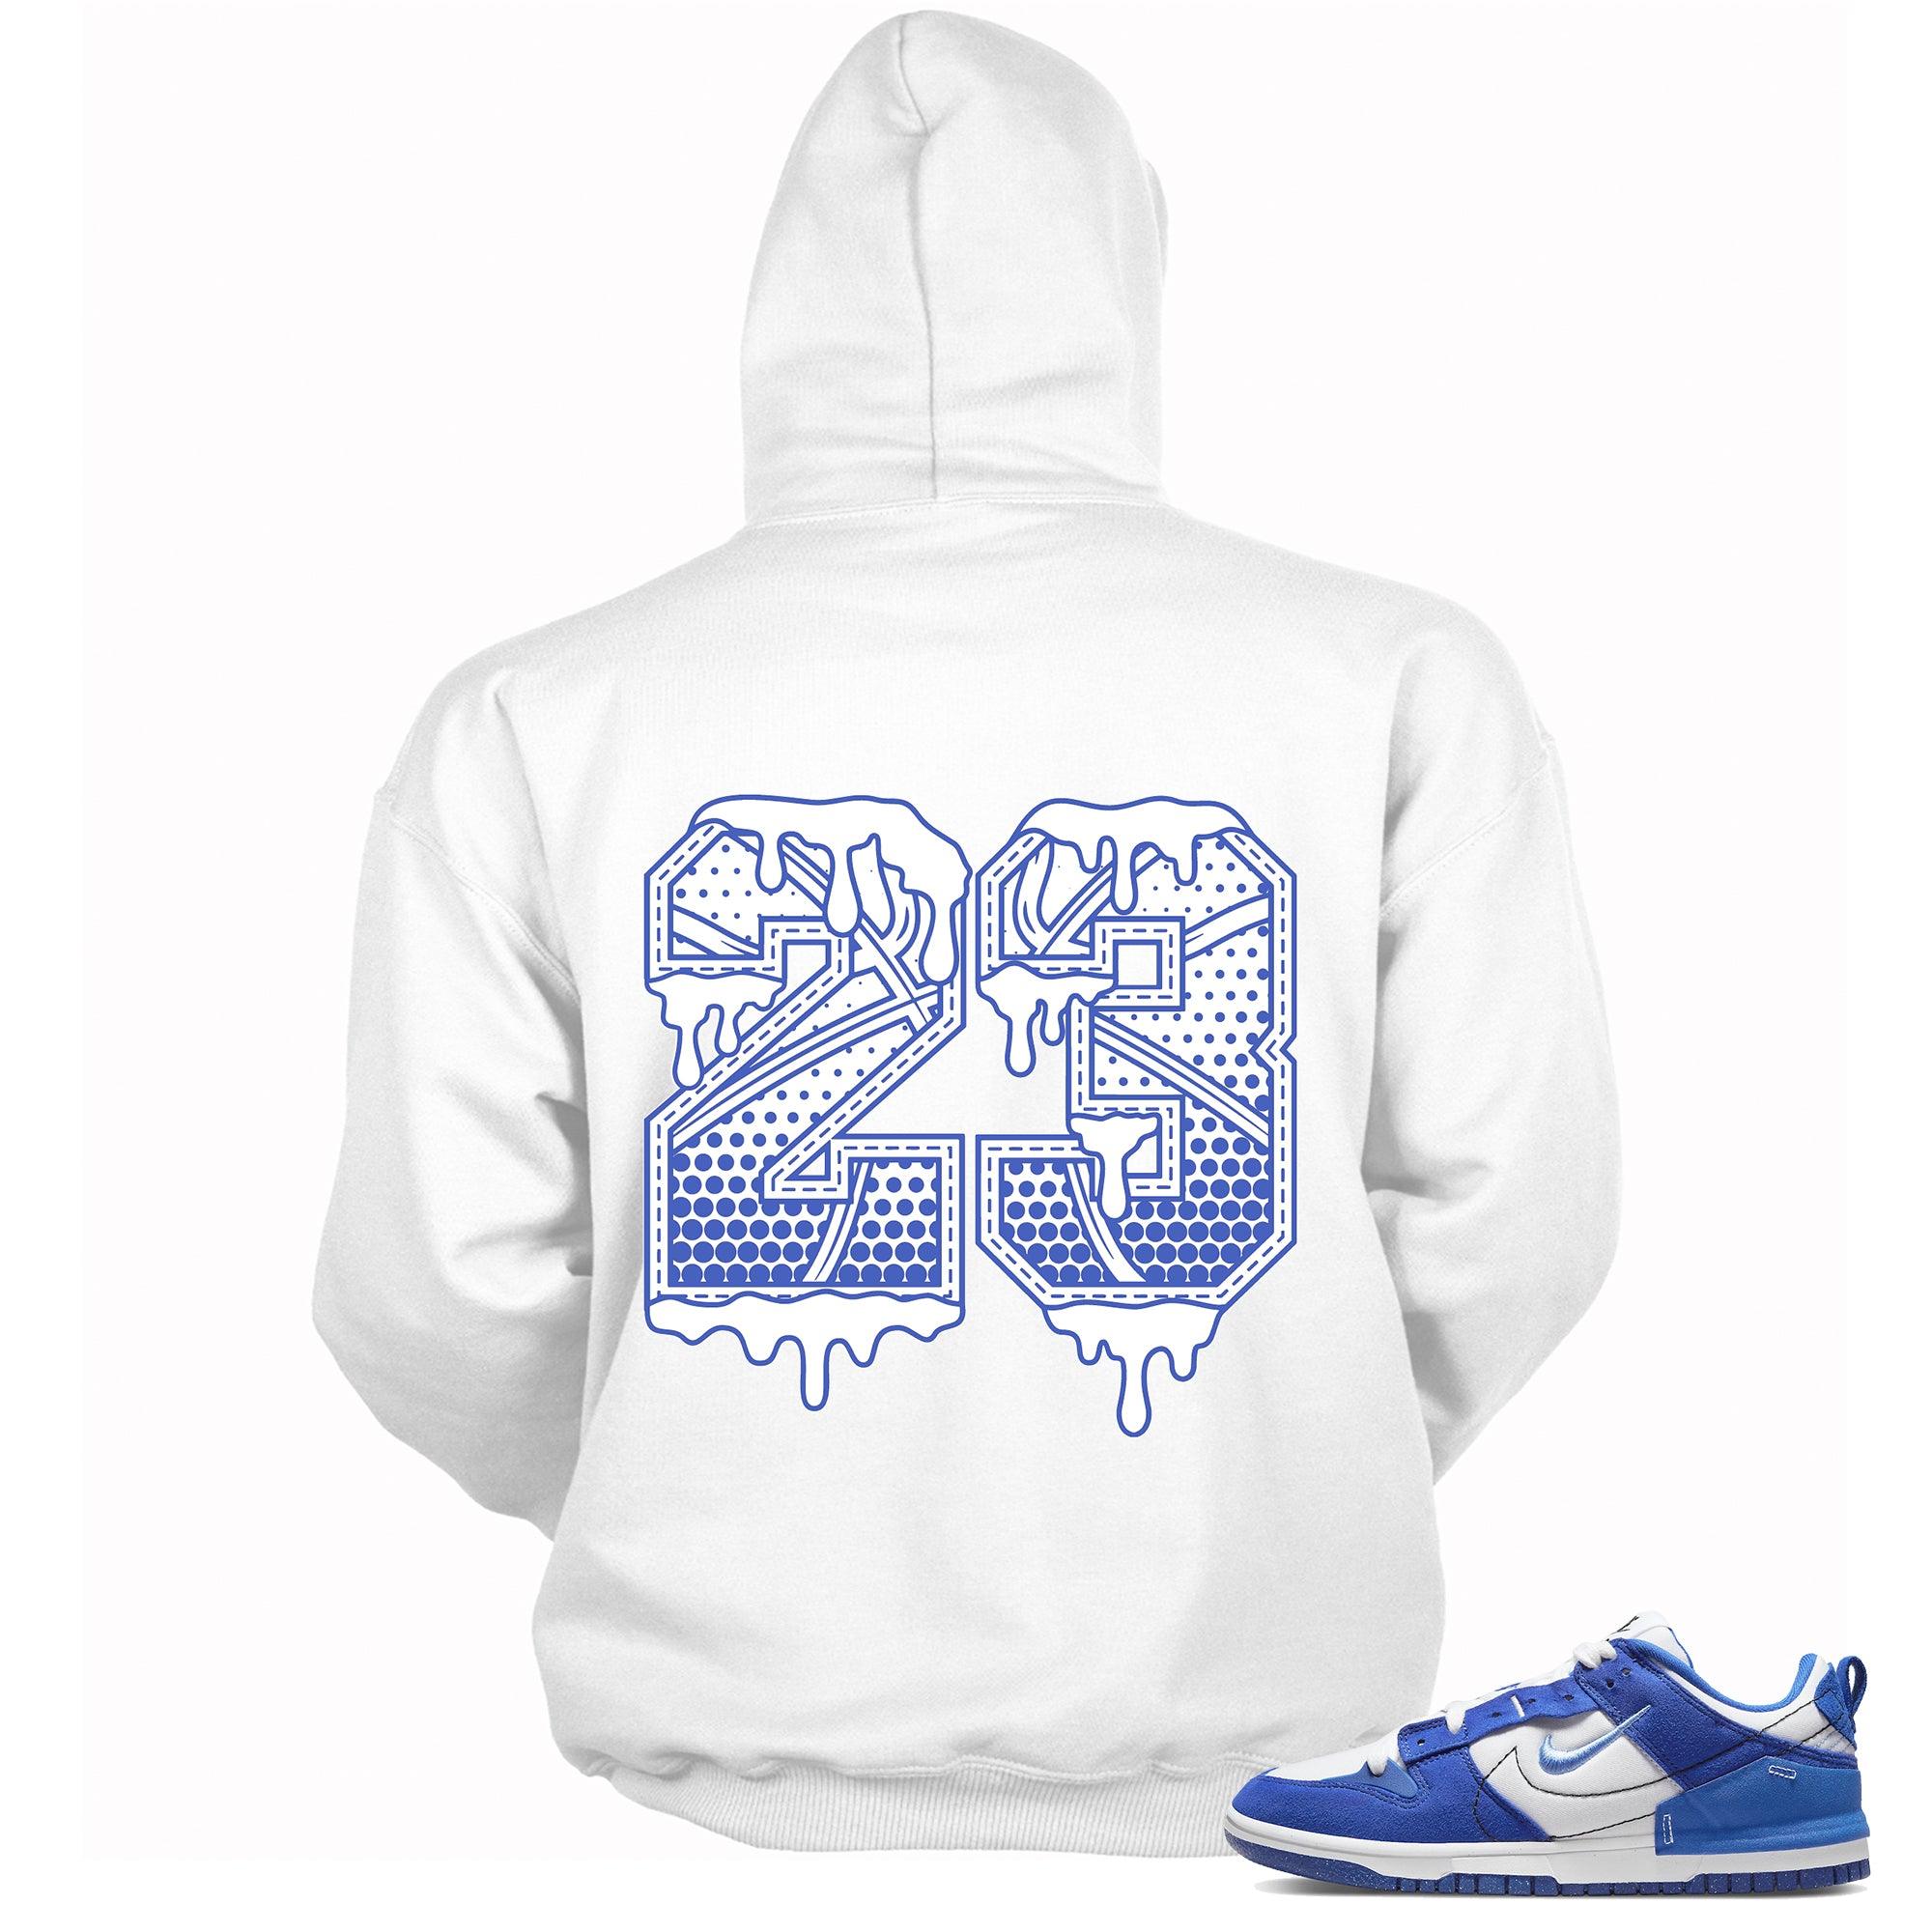 Number 23 Ball Hoodie Nike Dunk Low Disrupt 2 Hyper Royal photo